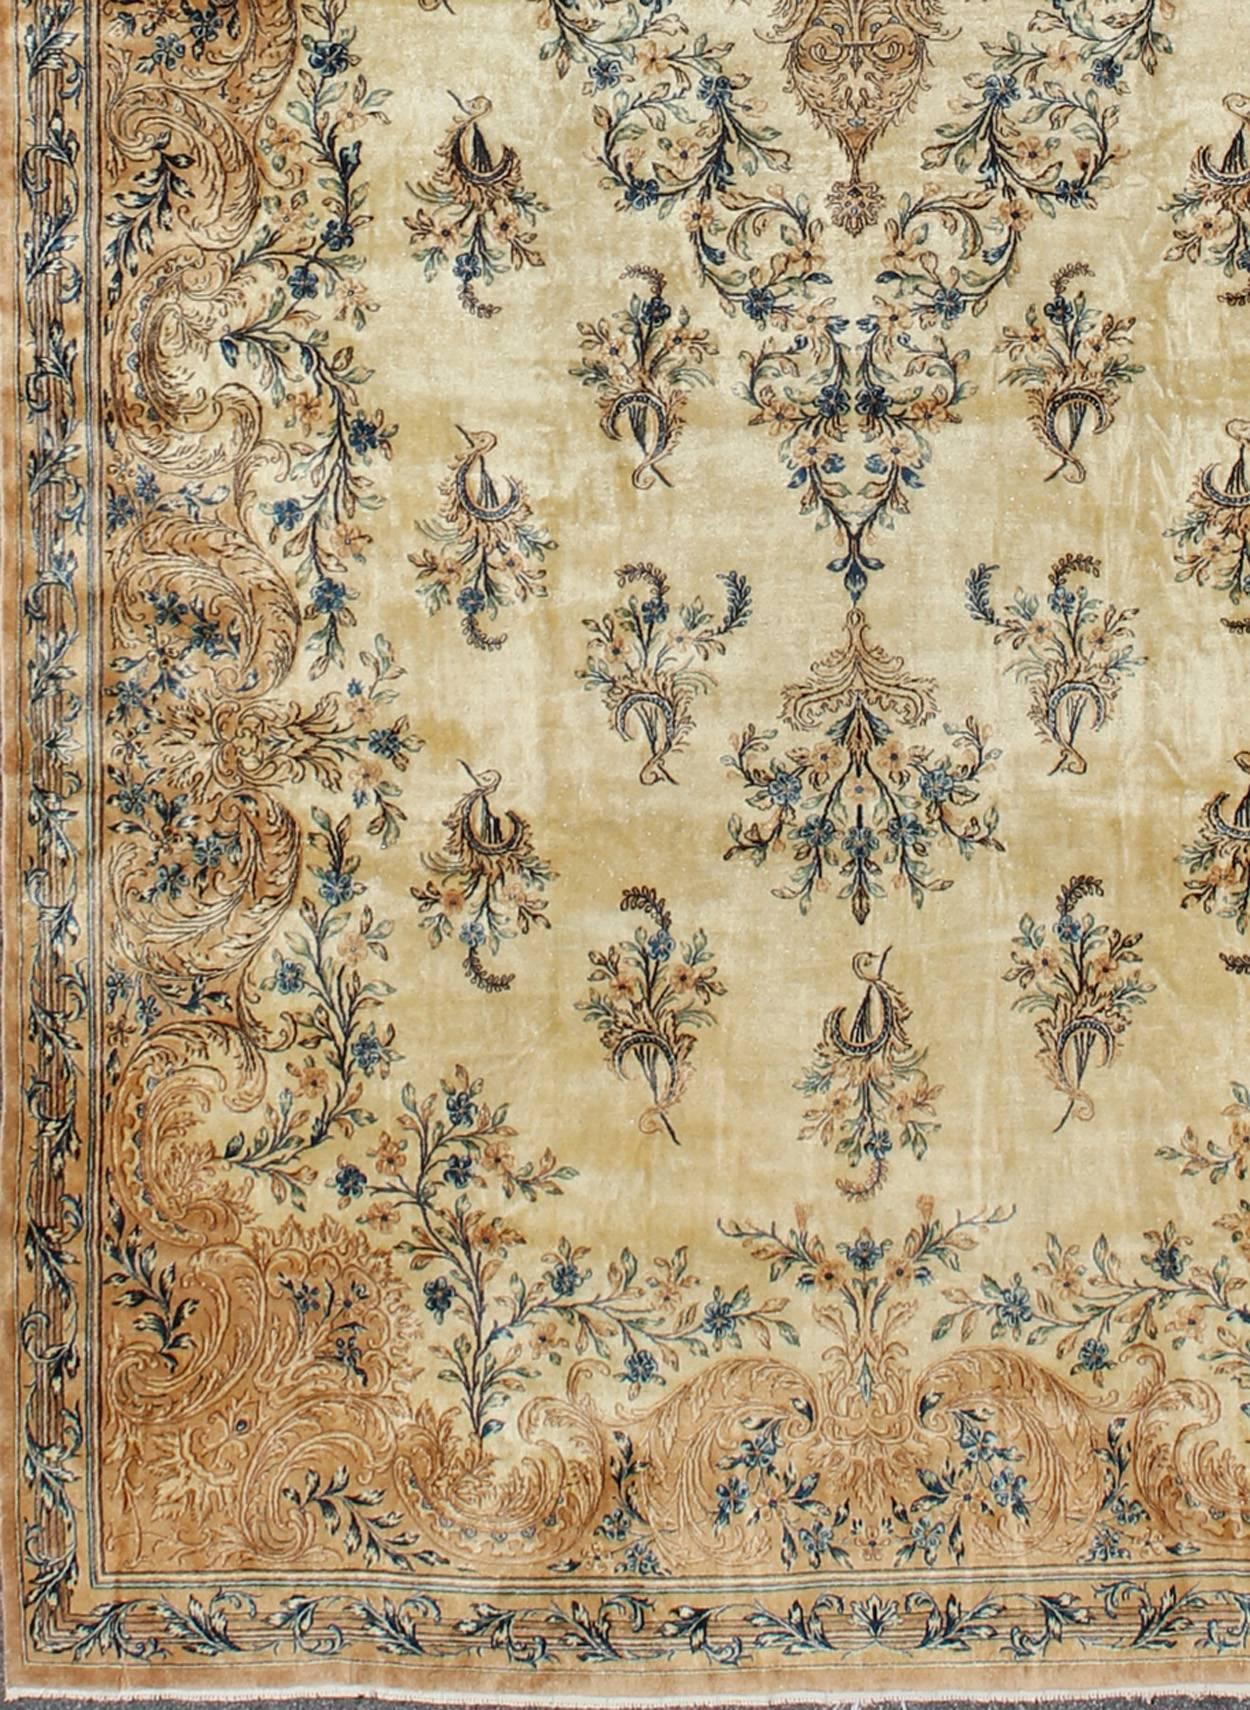 Antique Lavar Kerman rug with blossoming floral motifs in cream, tan and blue, rug dd-1, country of origin / type: Iran / Kerman, circa 1890

This Antique Lavar Kerman carpet from the late 19th century is remarkably crafted with a highly intricate